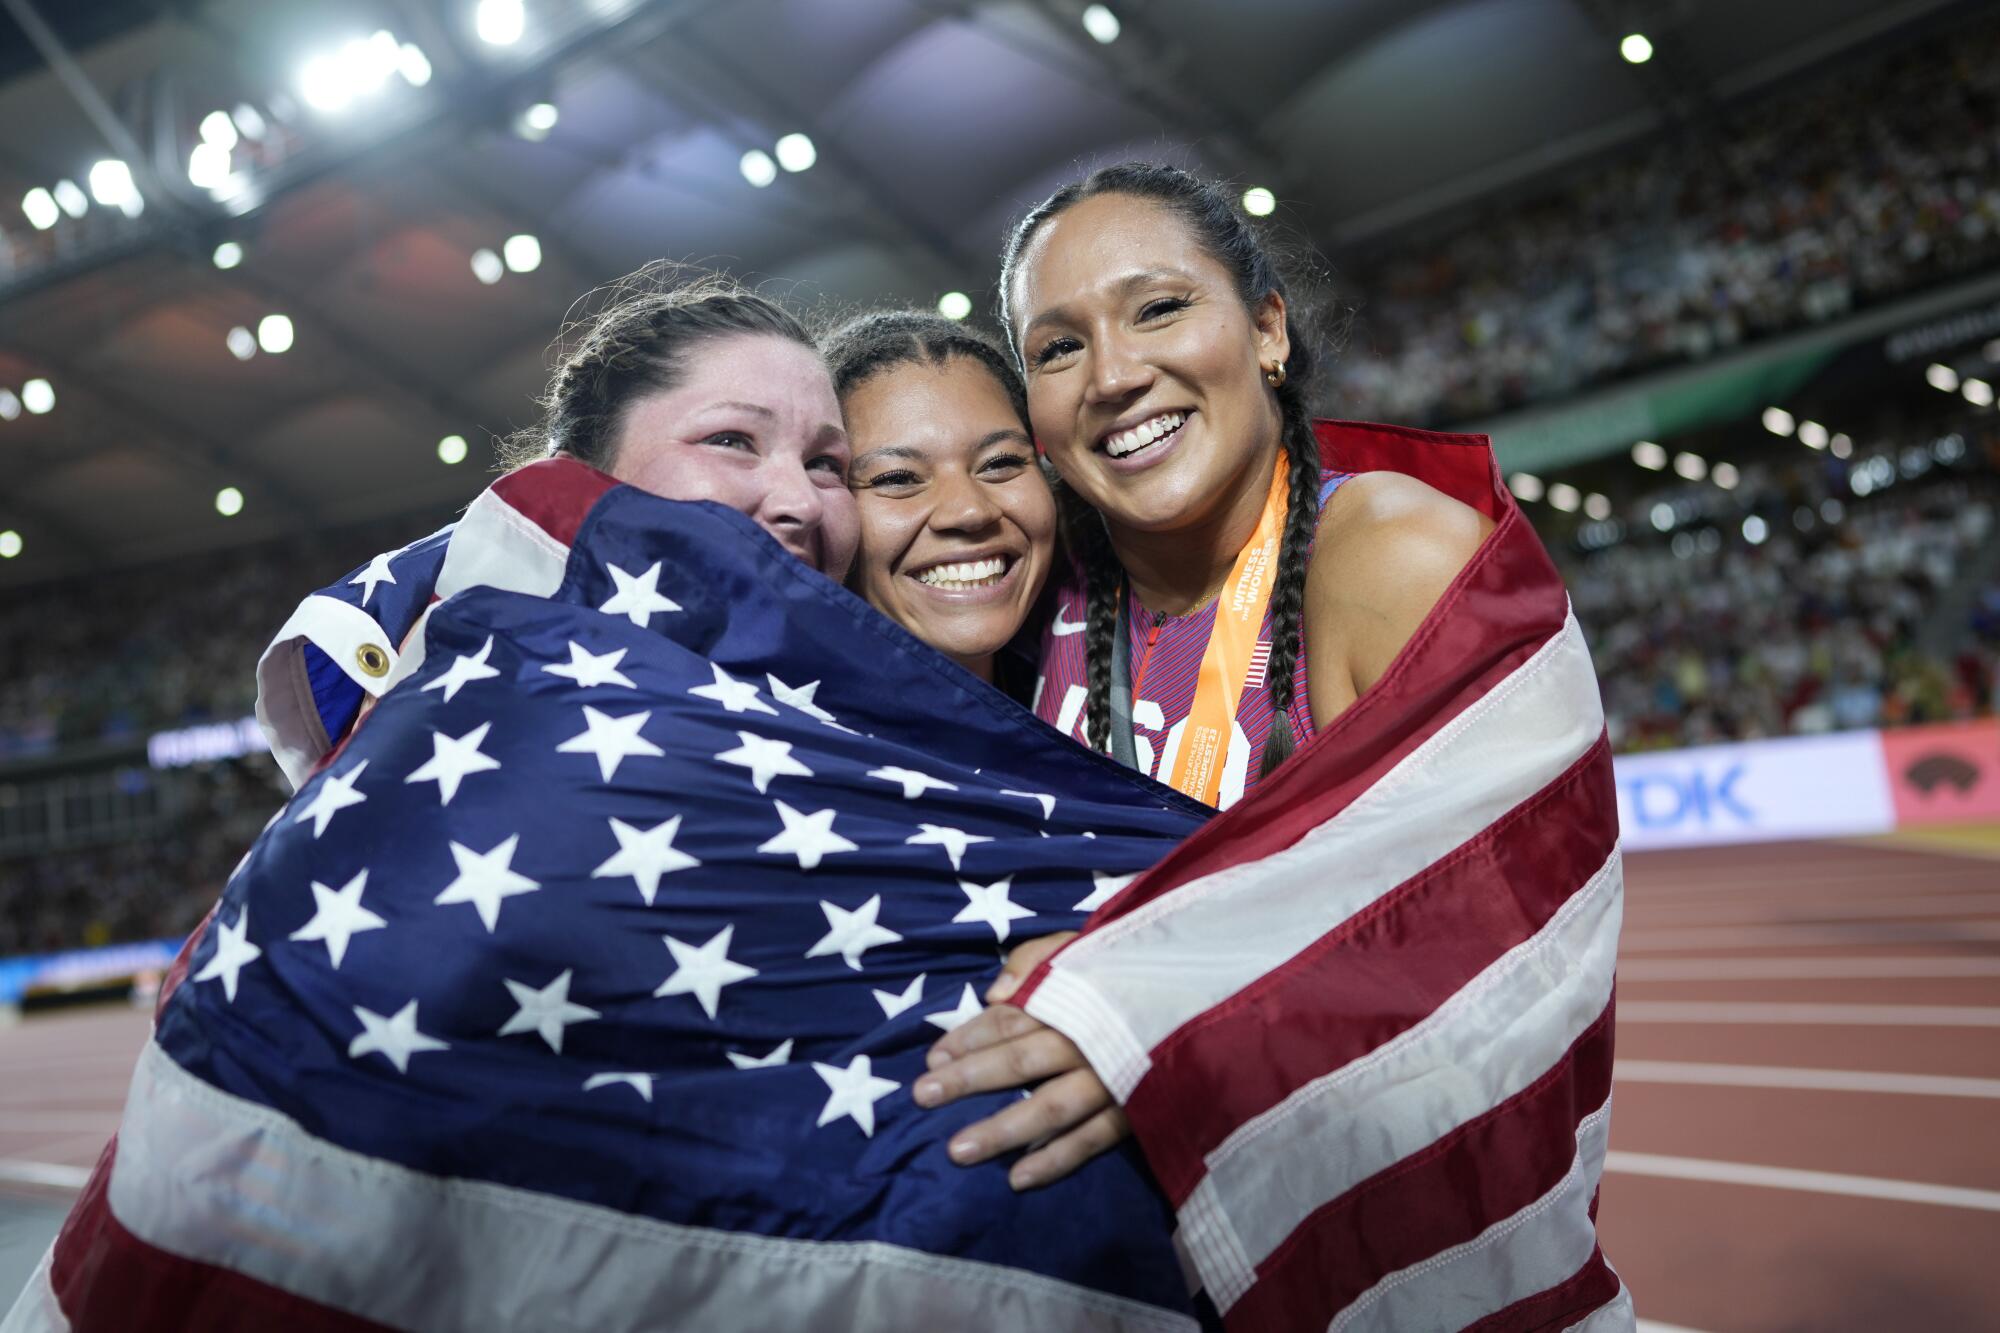 Americans Deanna Price, left, and Janee' Kassanavoid flank Camryn Rogers of Canada after winning medals in the hammer throw.